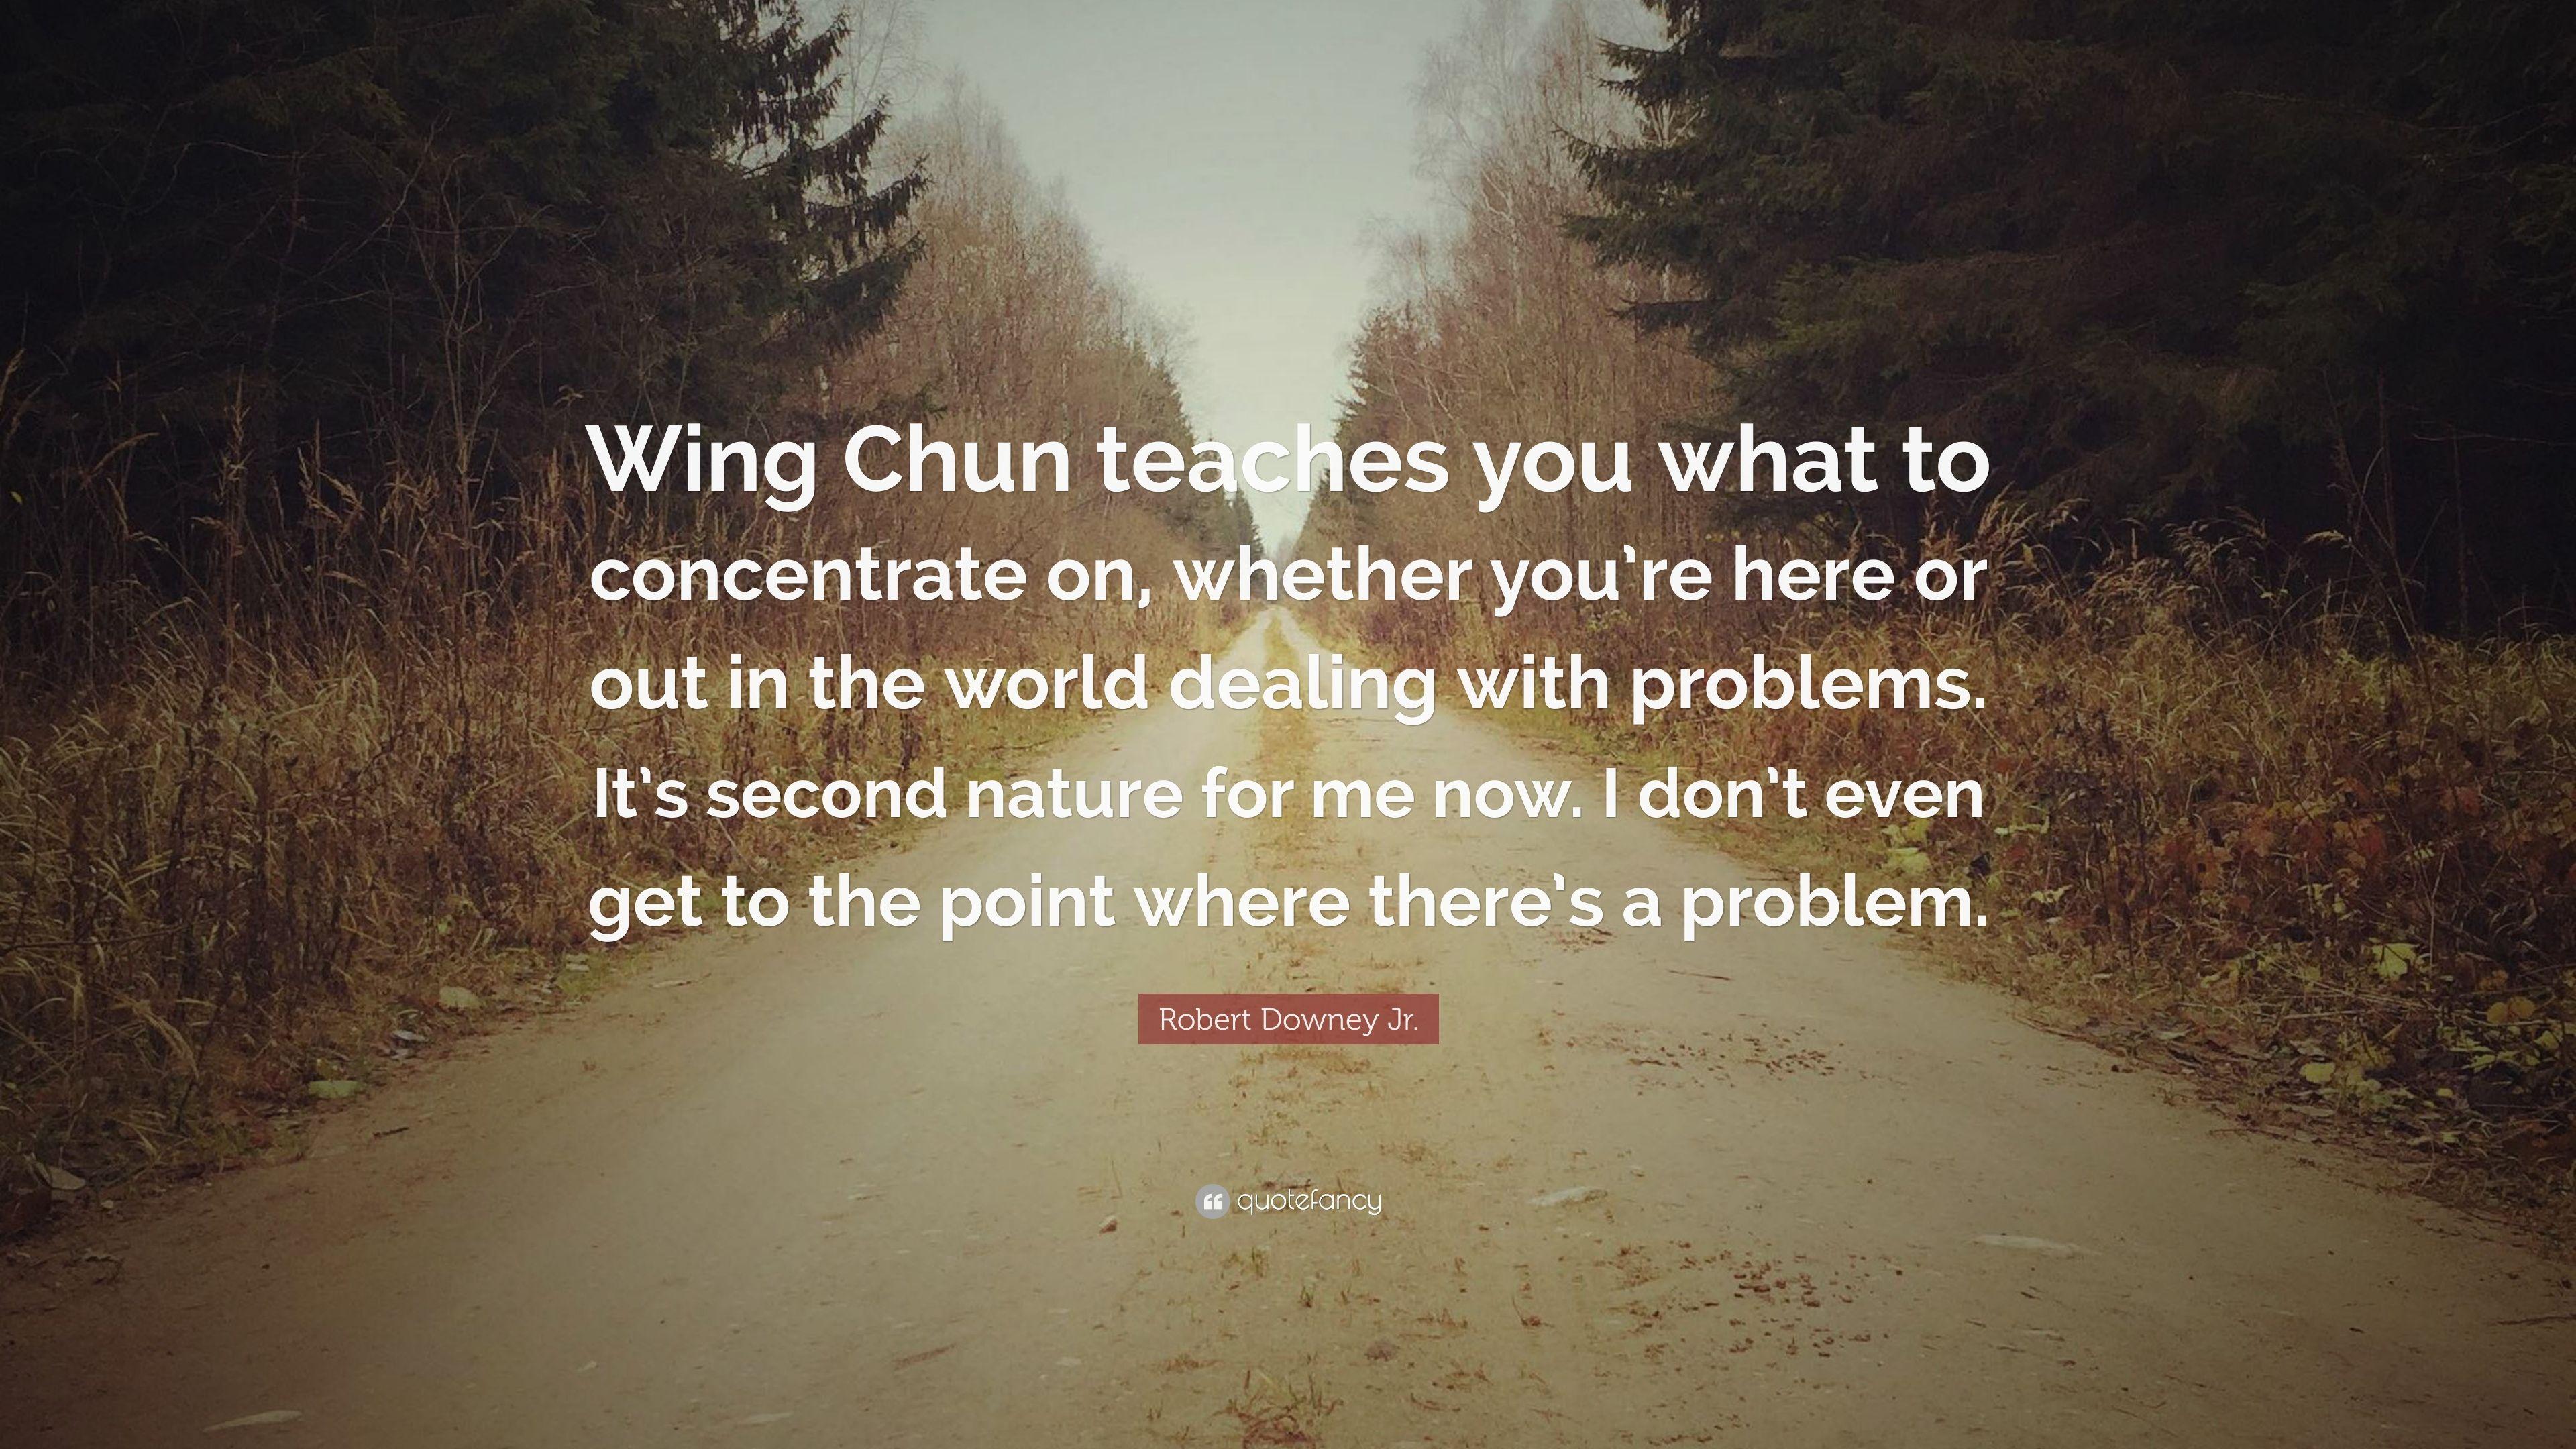 Robert Downey Jr. Quote: “Wing Chun teaches you what to concentrate